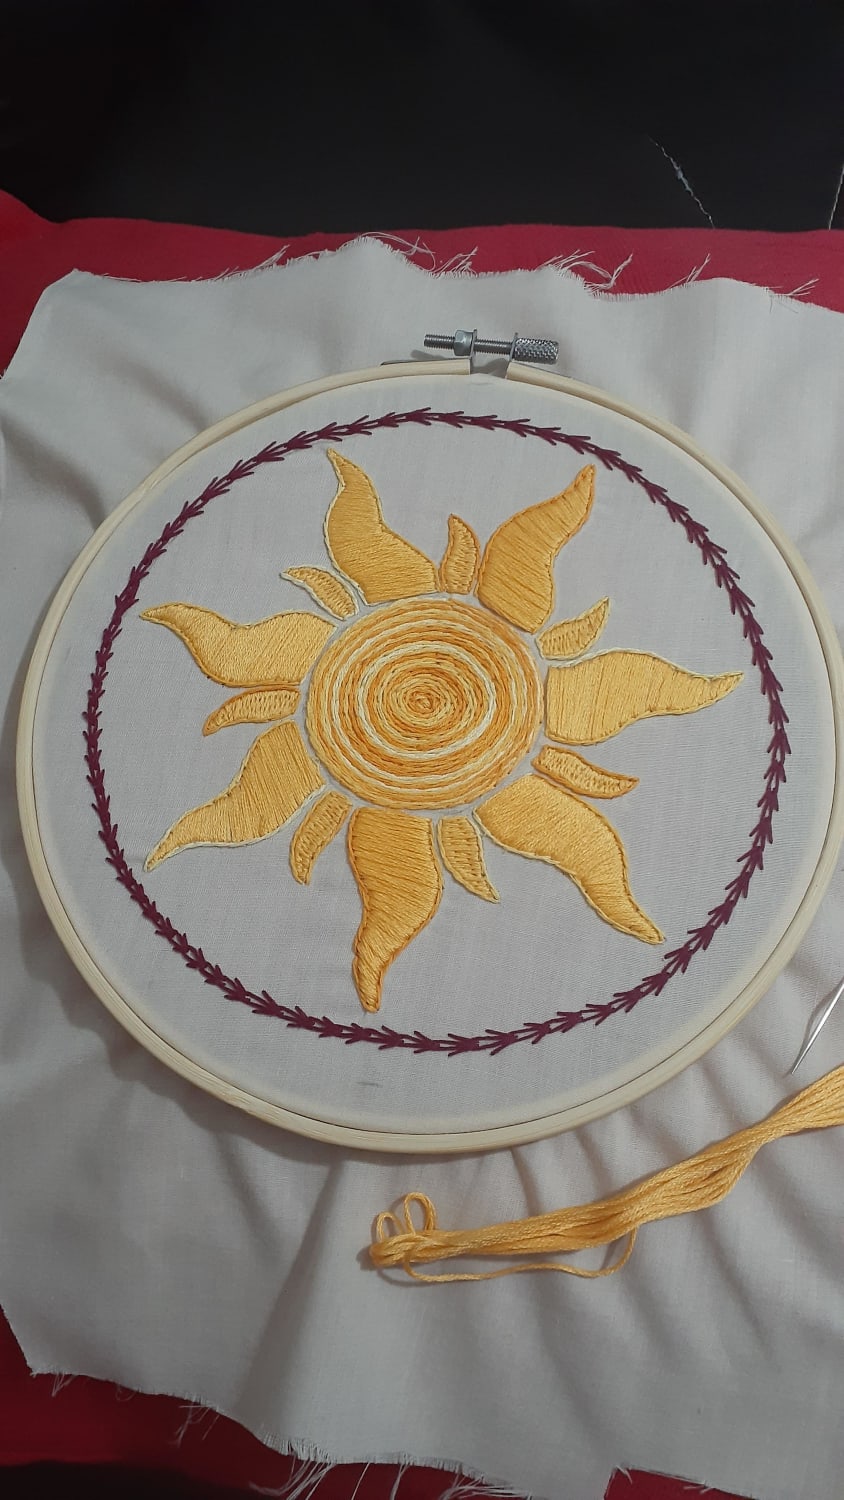 My first embroidery work. I think I made every single possible mistake, but learned a lot from this. And more importantly, had so much fun! I'm obsessed with embroidery now. This is the Tangled movie sun design.